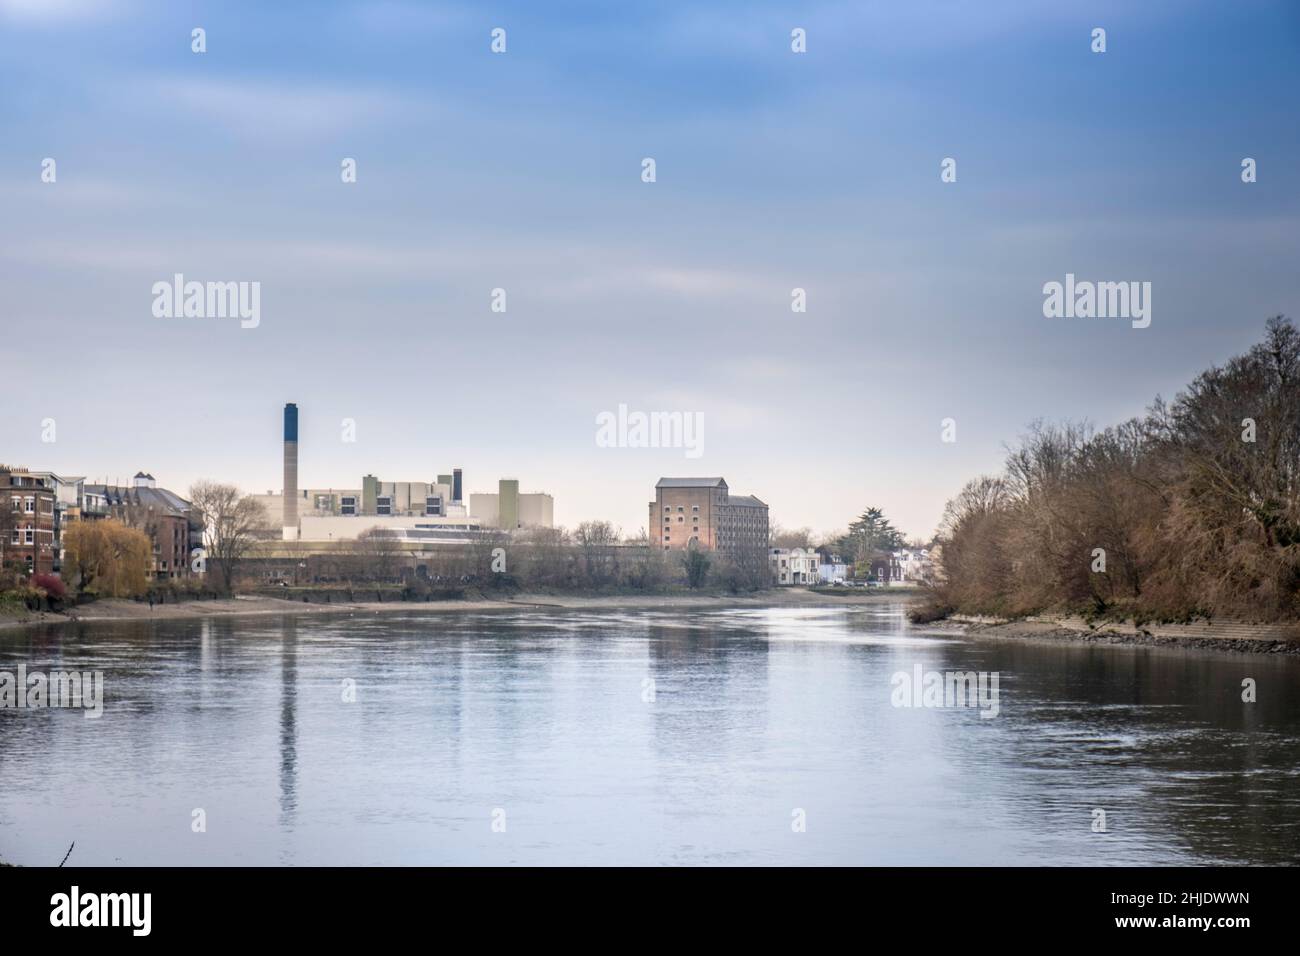 River Thames at Mortlake, London. Chimneys & buildings of The Stag Brewery redevelopment site (formerly the Watneys & the Anheuser Busch brewery). Stock Photo